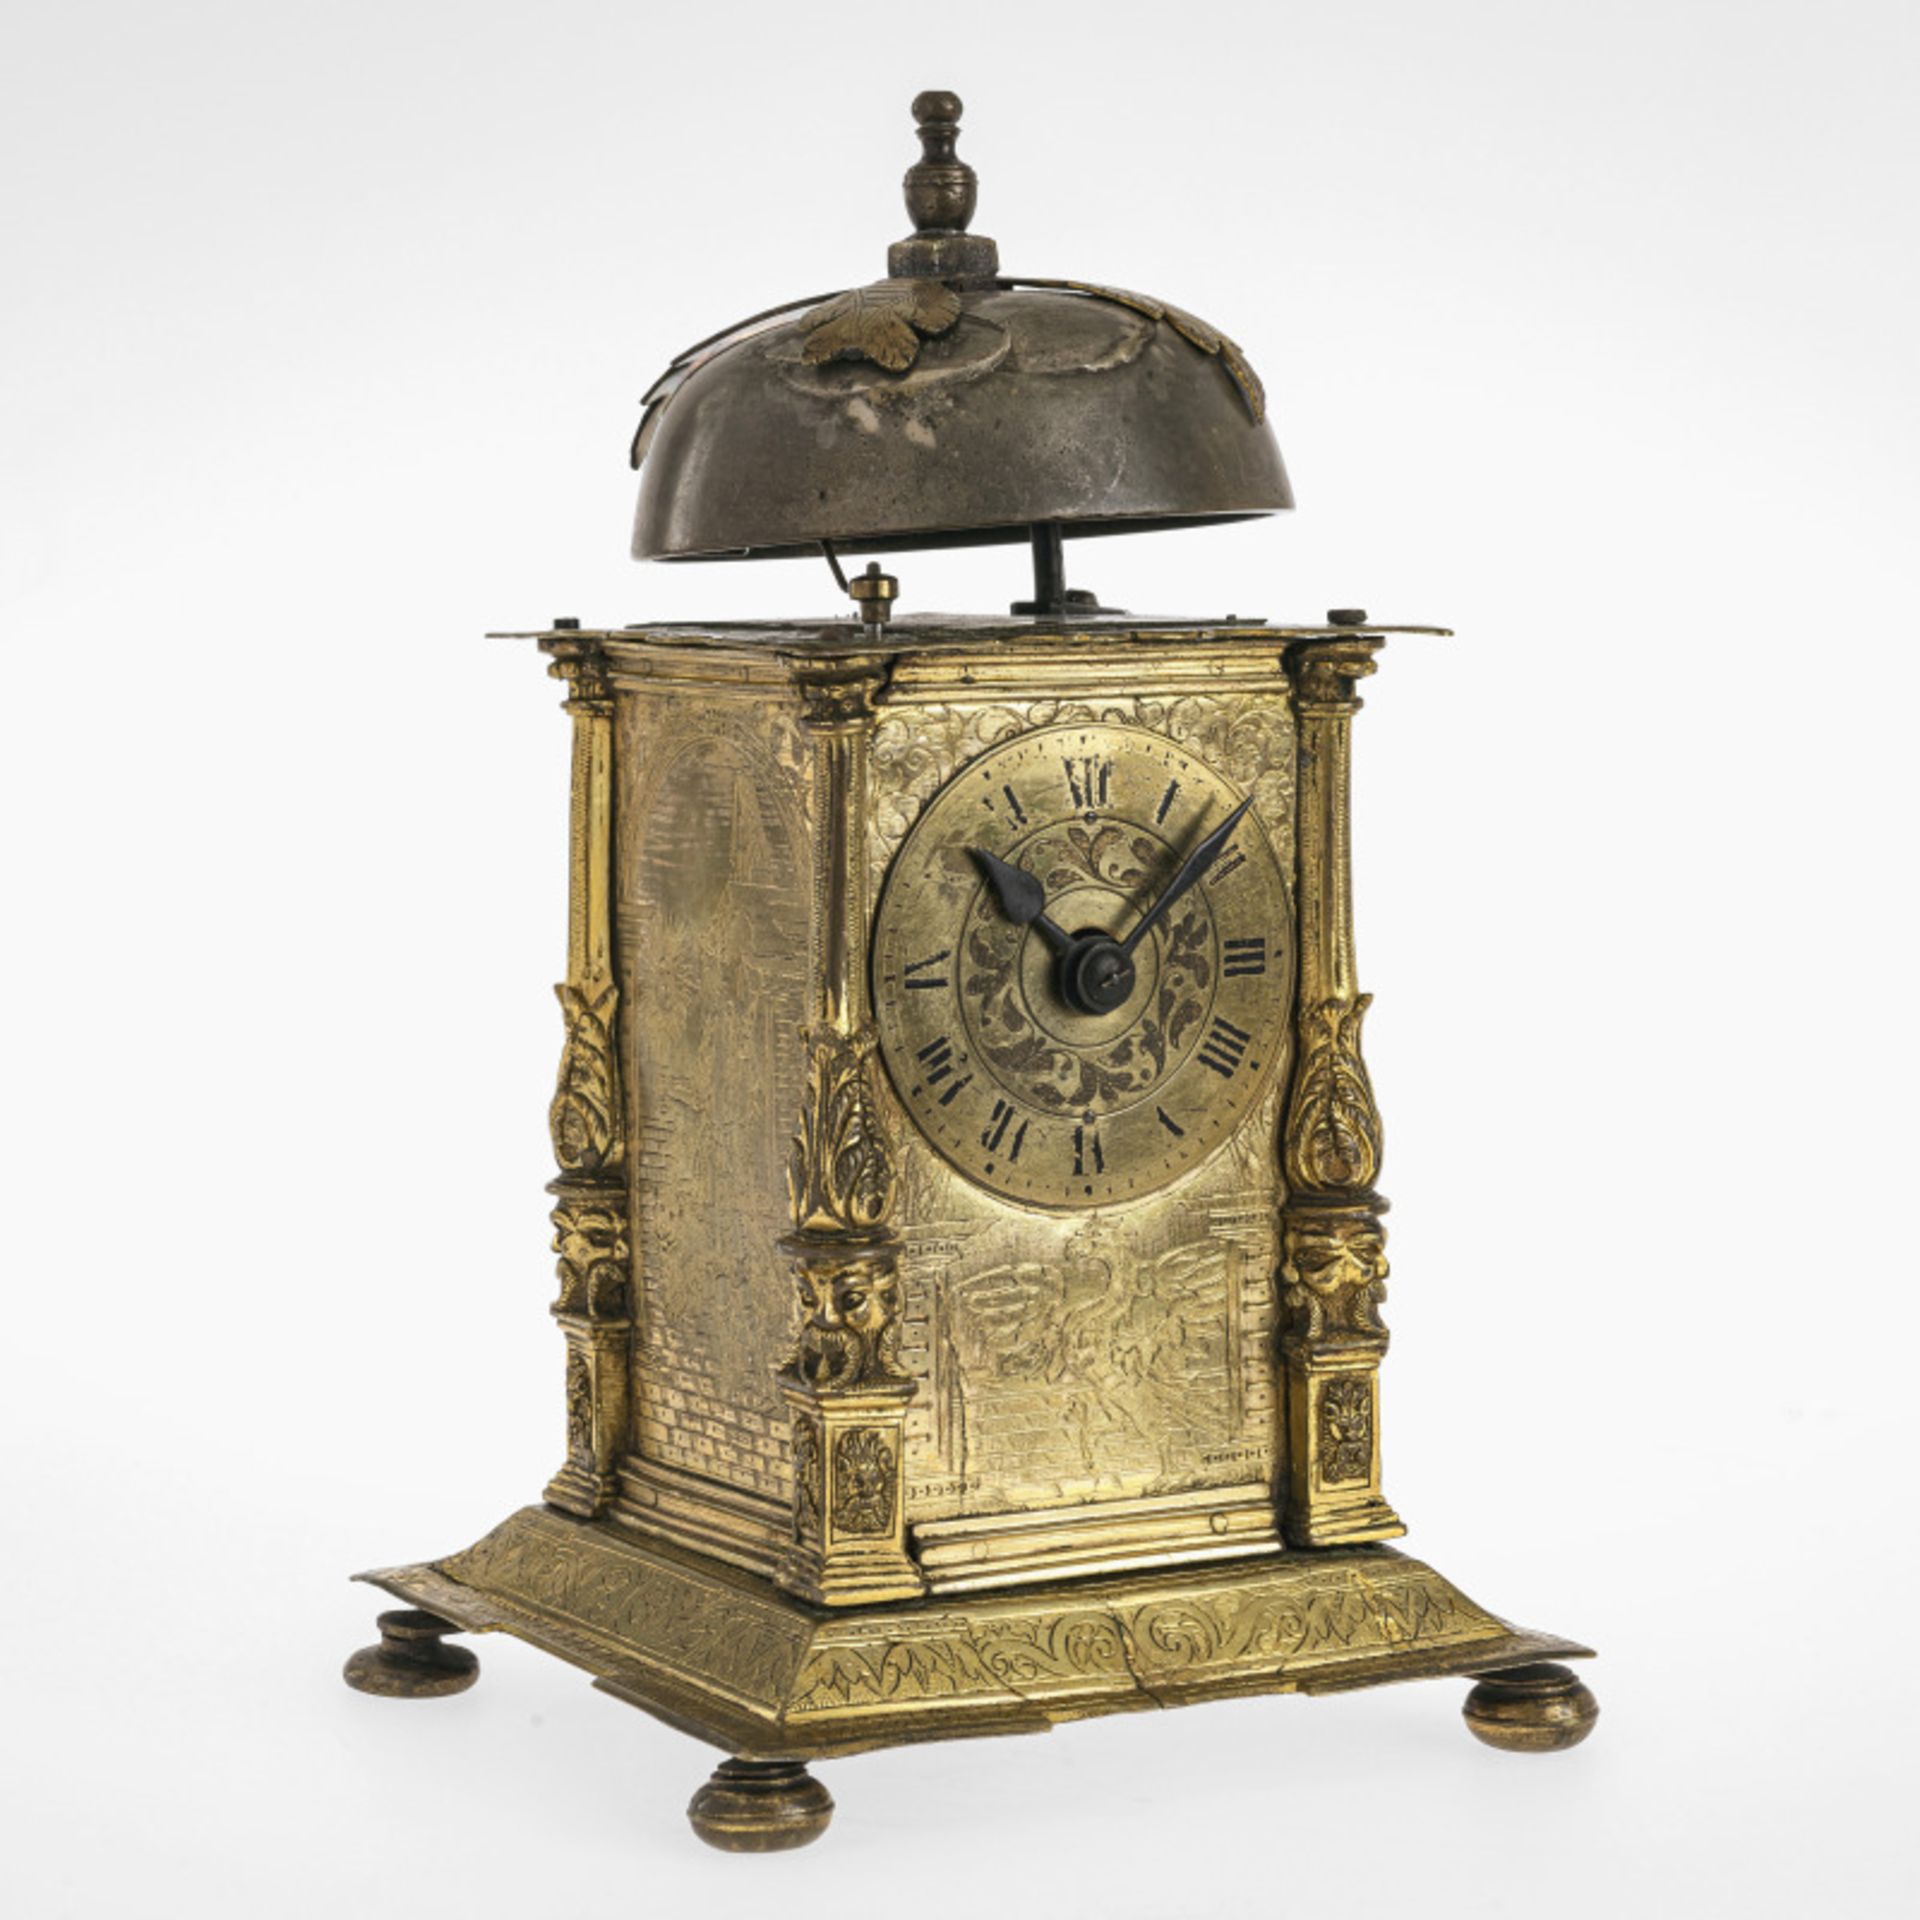 A tabernacle clock - German (?), late 16th century and later